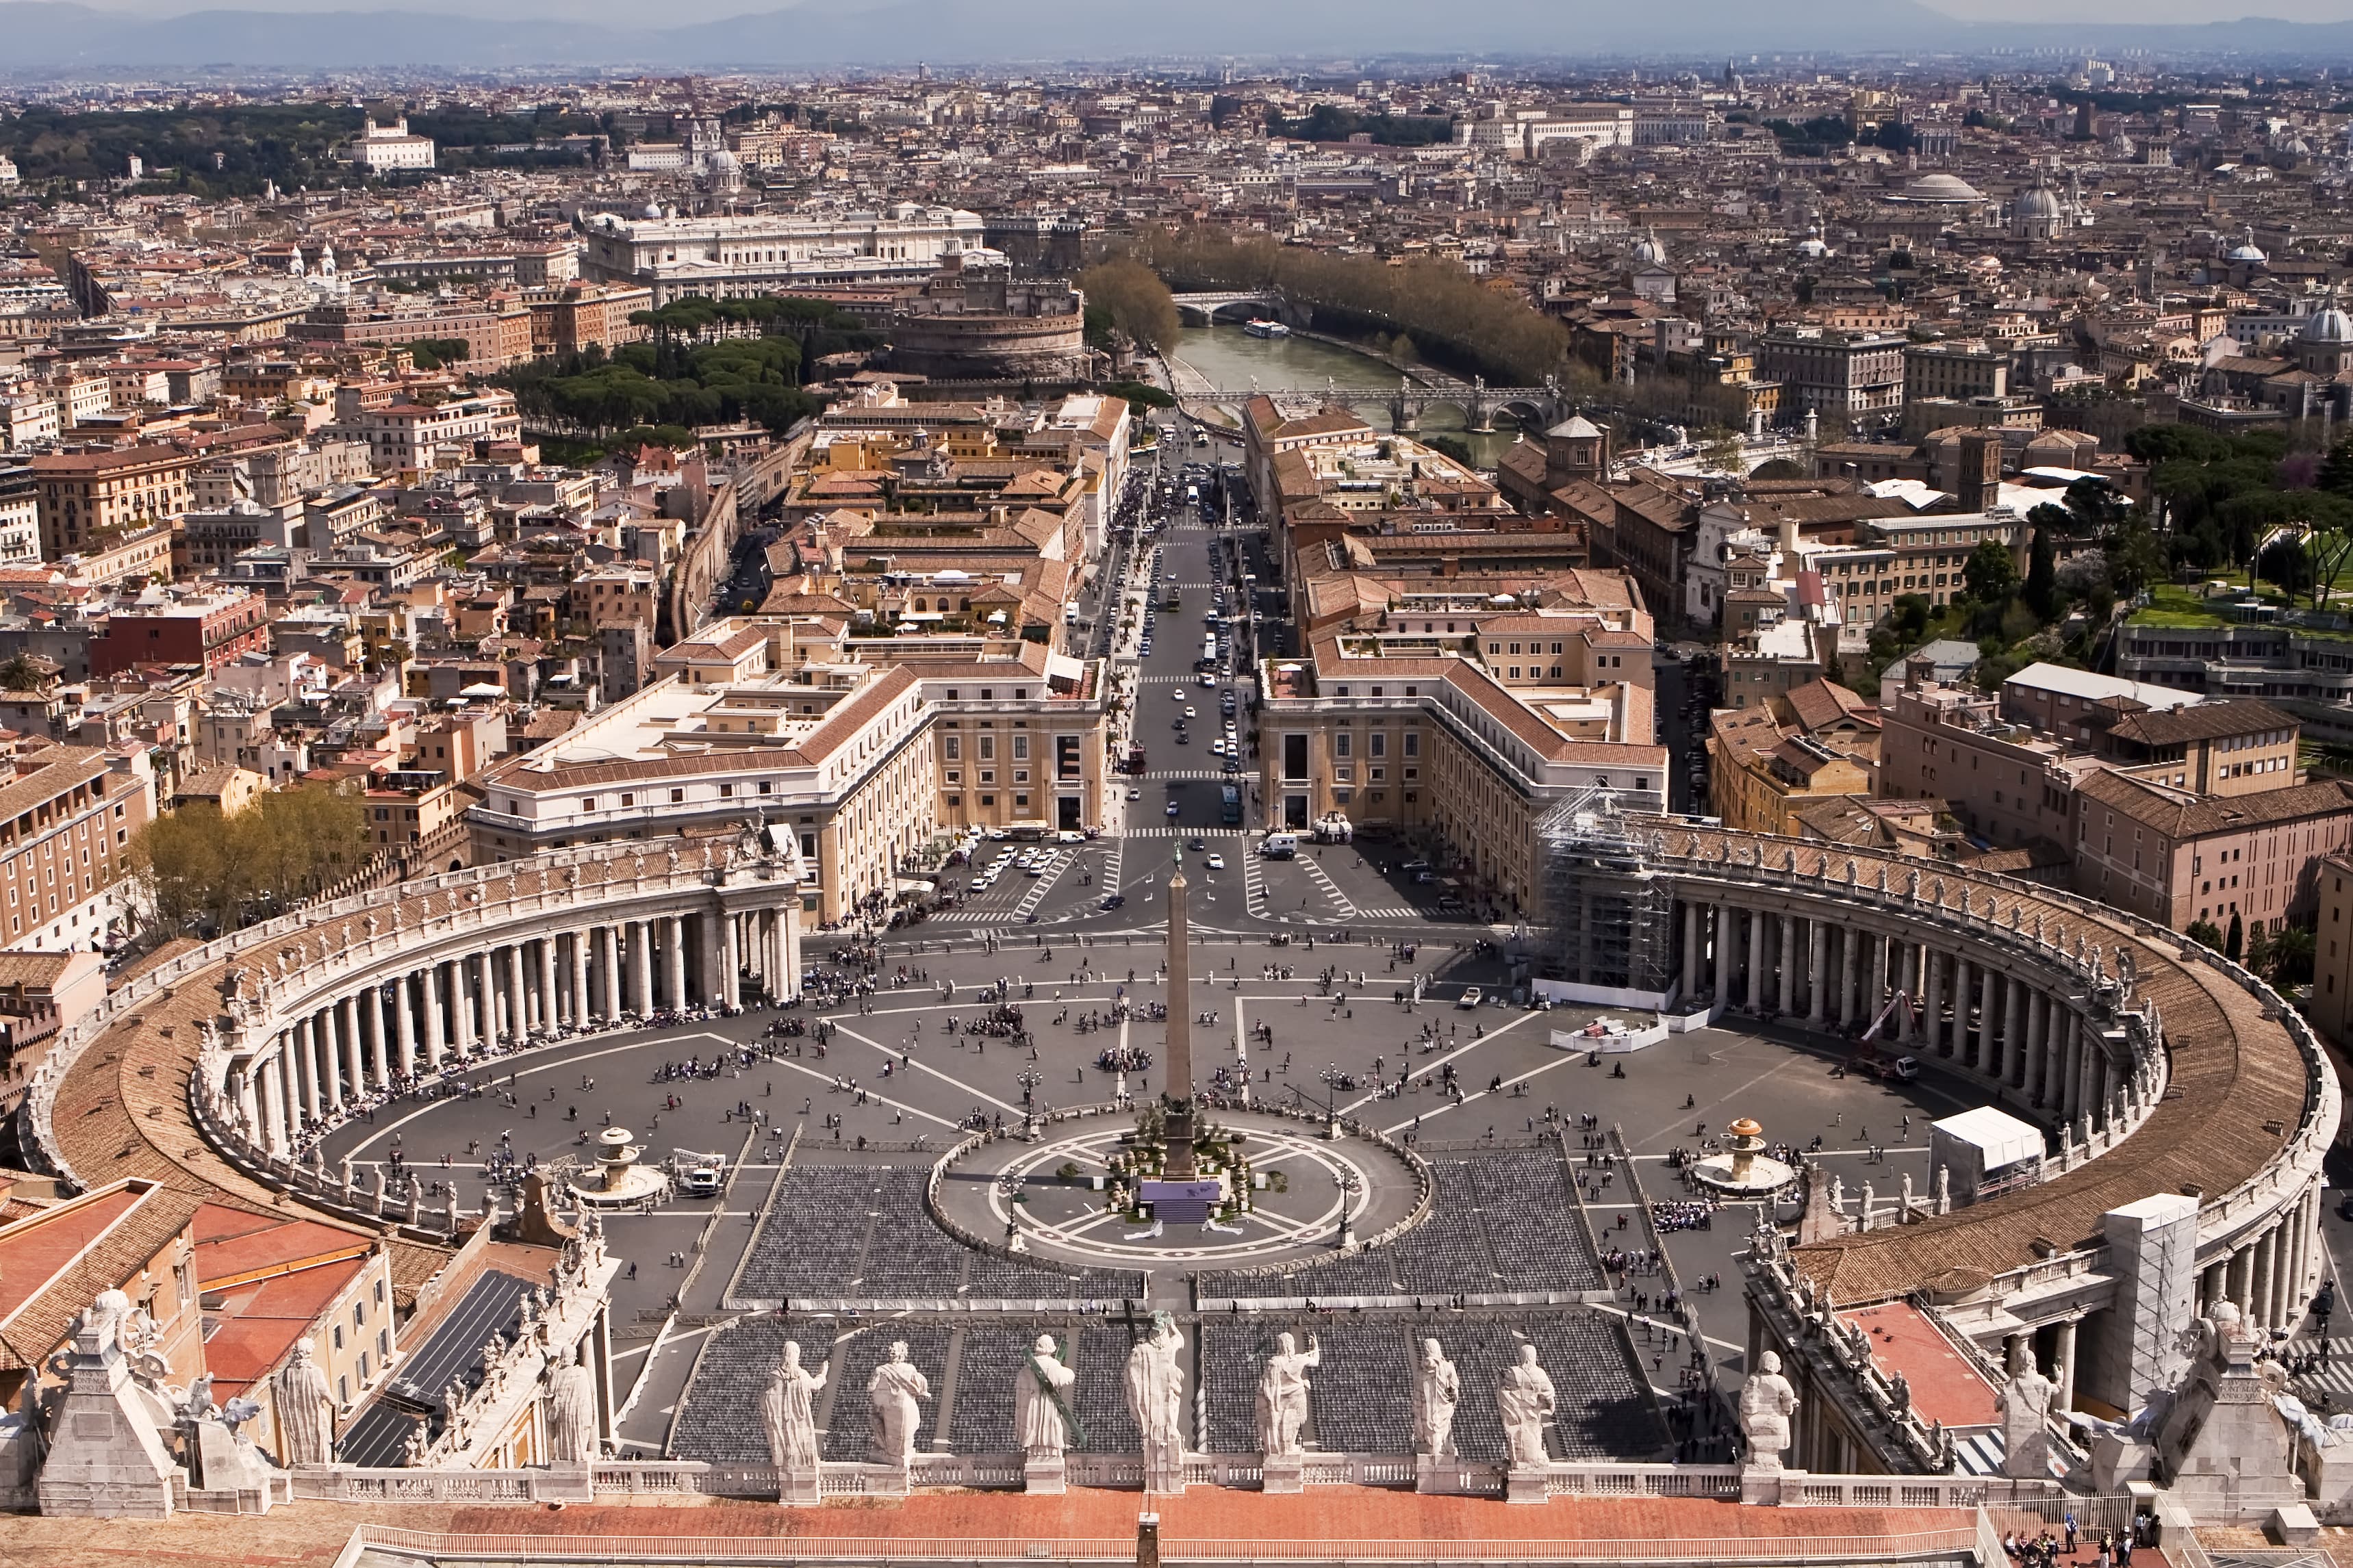 View from the top of St. Peter's Basilica in the Vatican city.